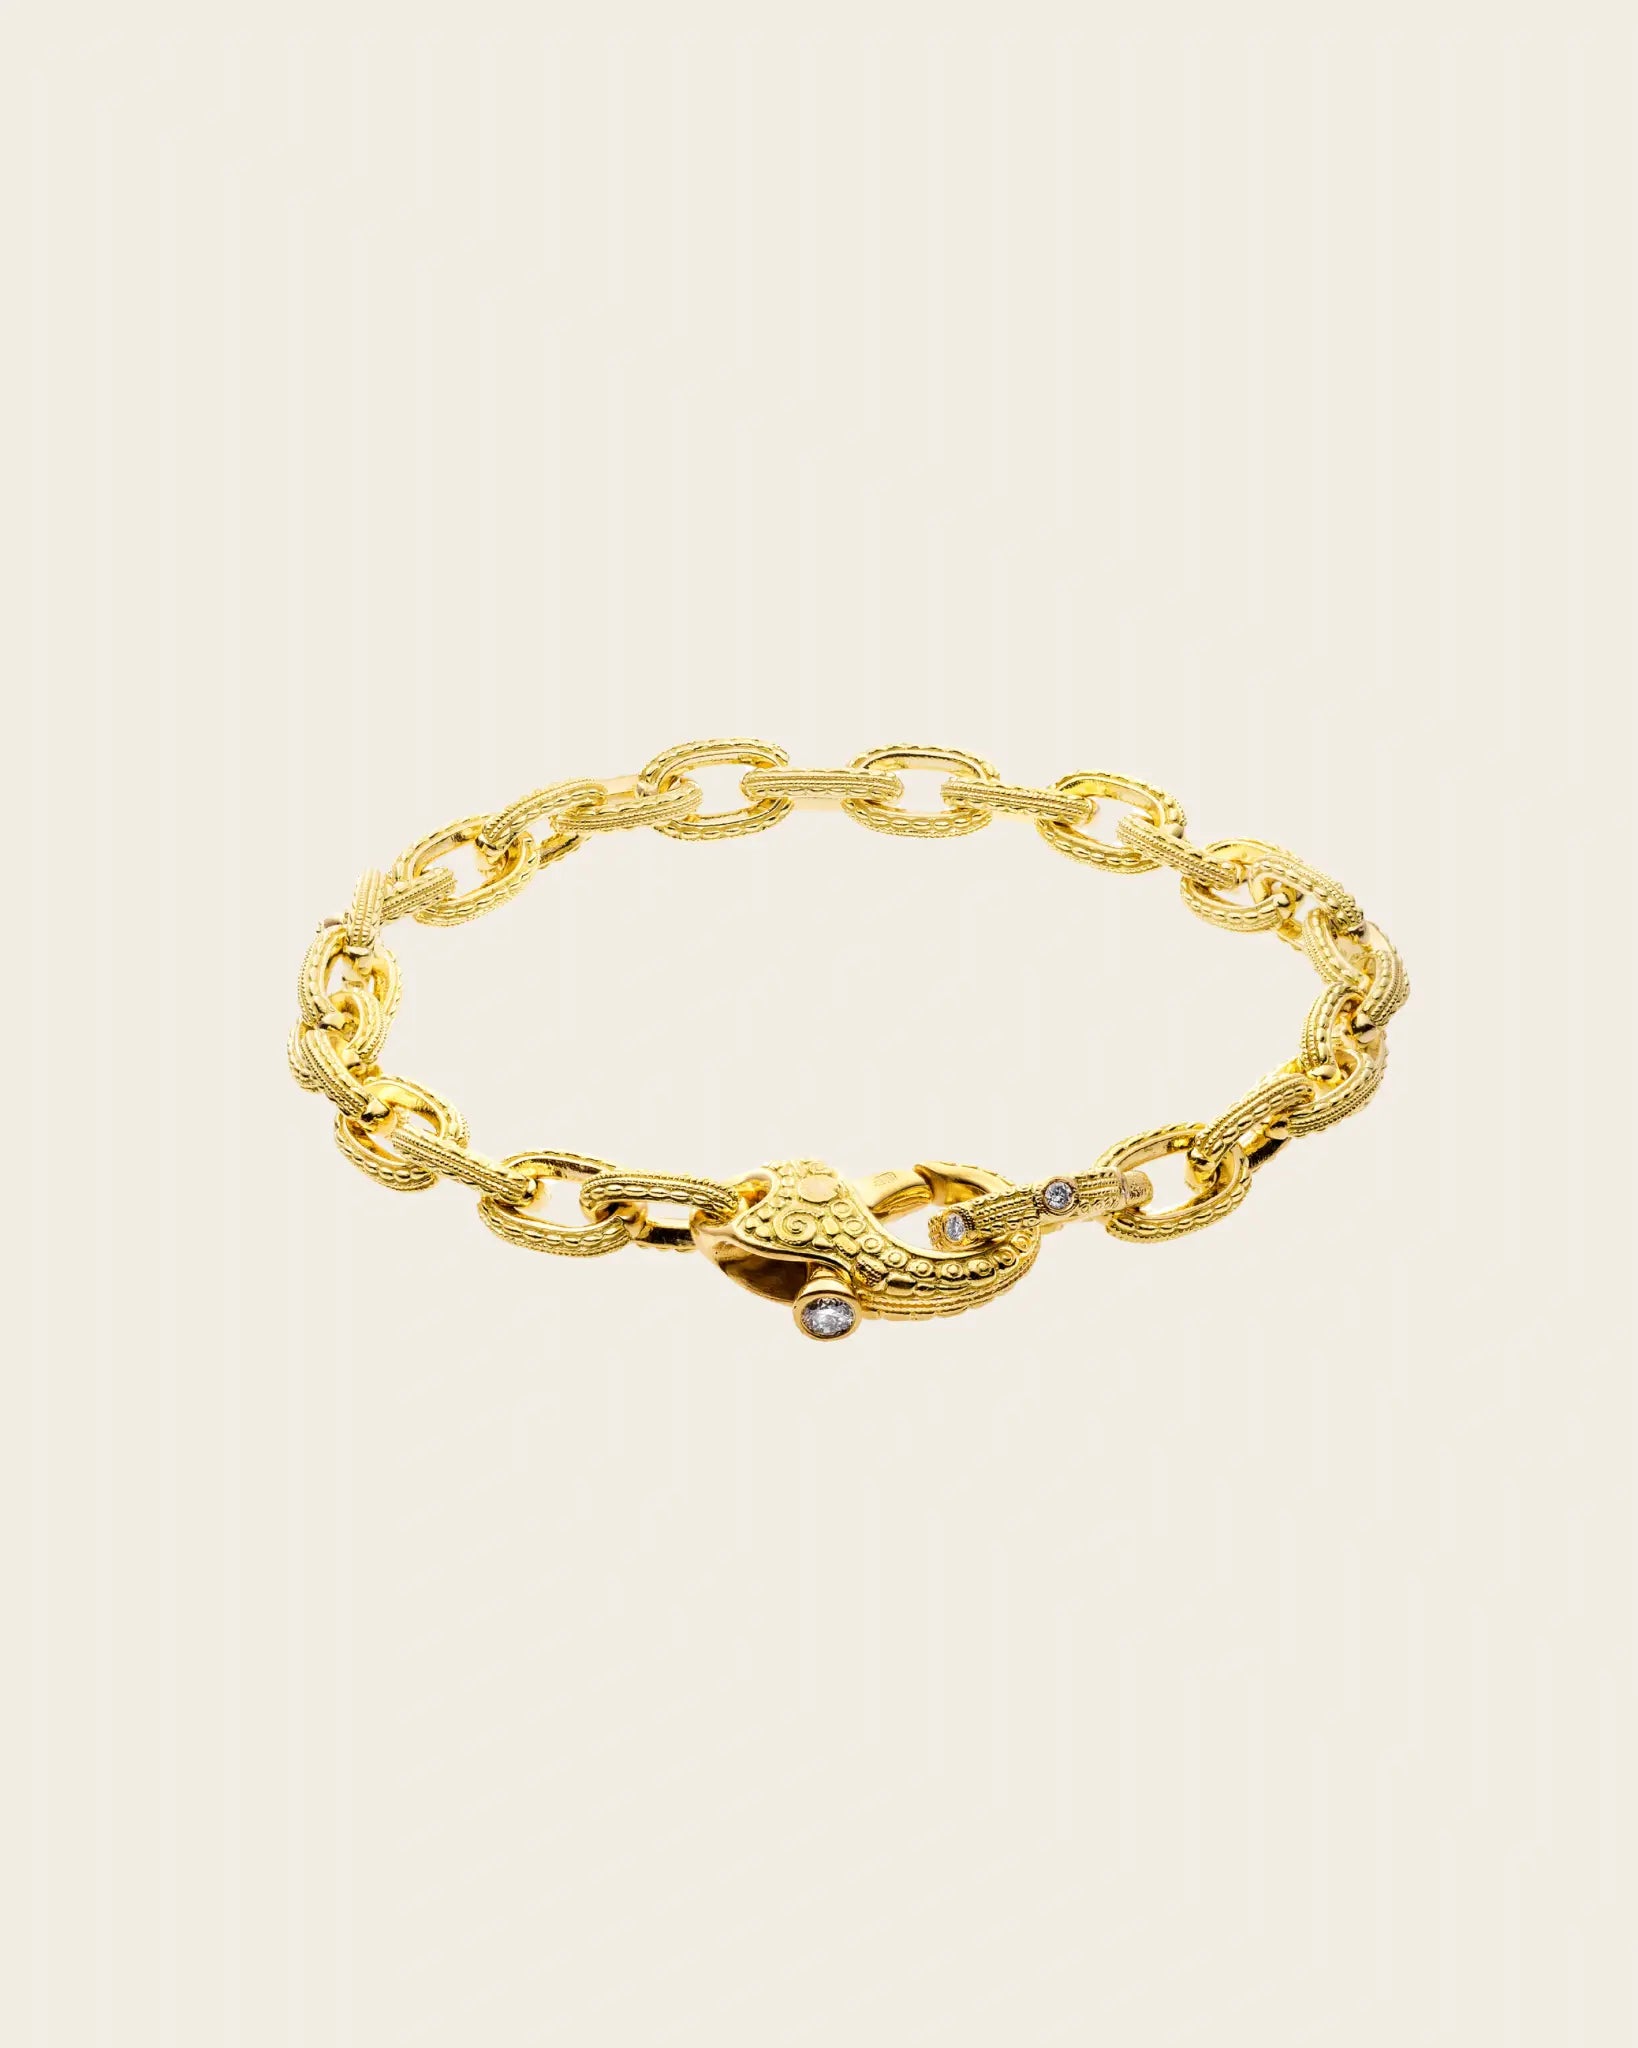 Gold and Diamond "Victorian" Bracelet Gold and Diamond "Victorian" Bracelet Alex Sepkus Alex Sepkus  Squash Blossom Vail